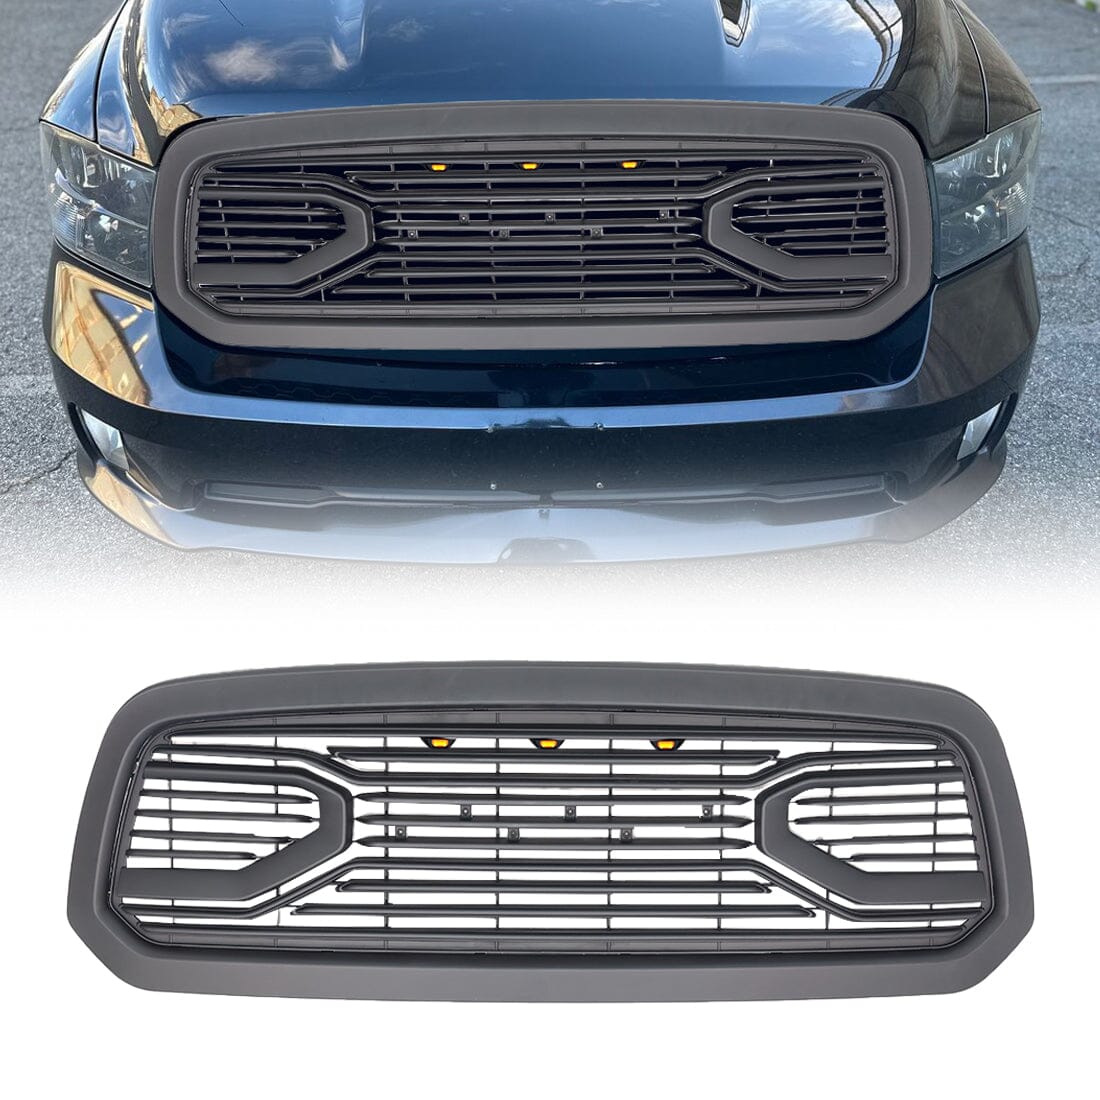 Big Horn Style Front Grille W/Amber-Matte Black For 2013-2018 Dodge Ram 1500 | American Modified